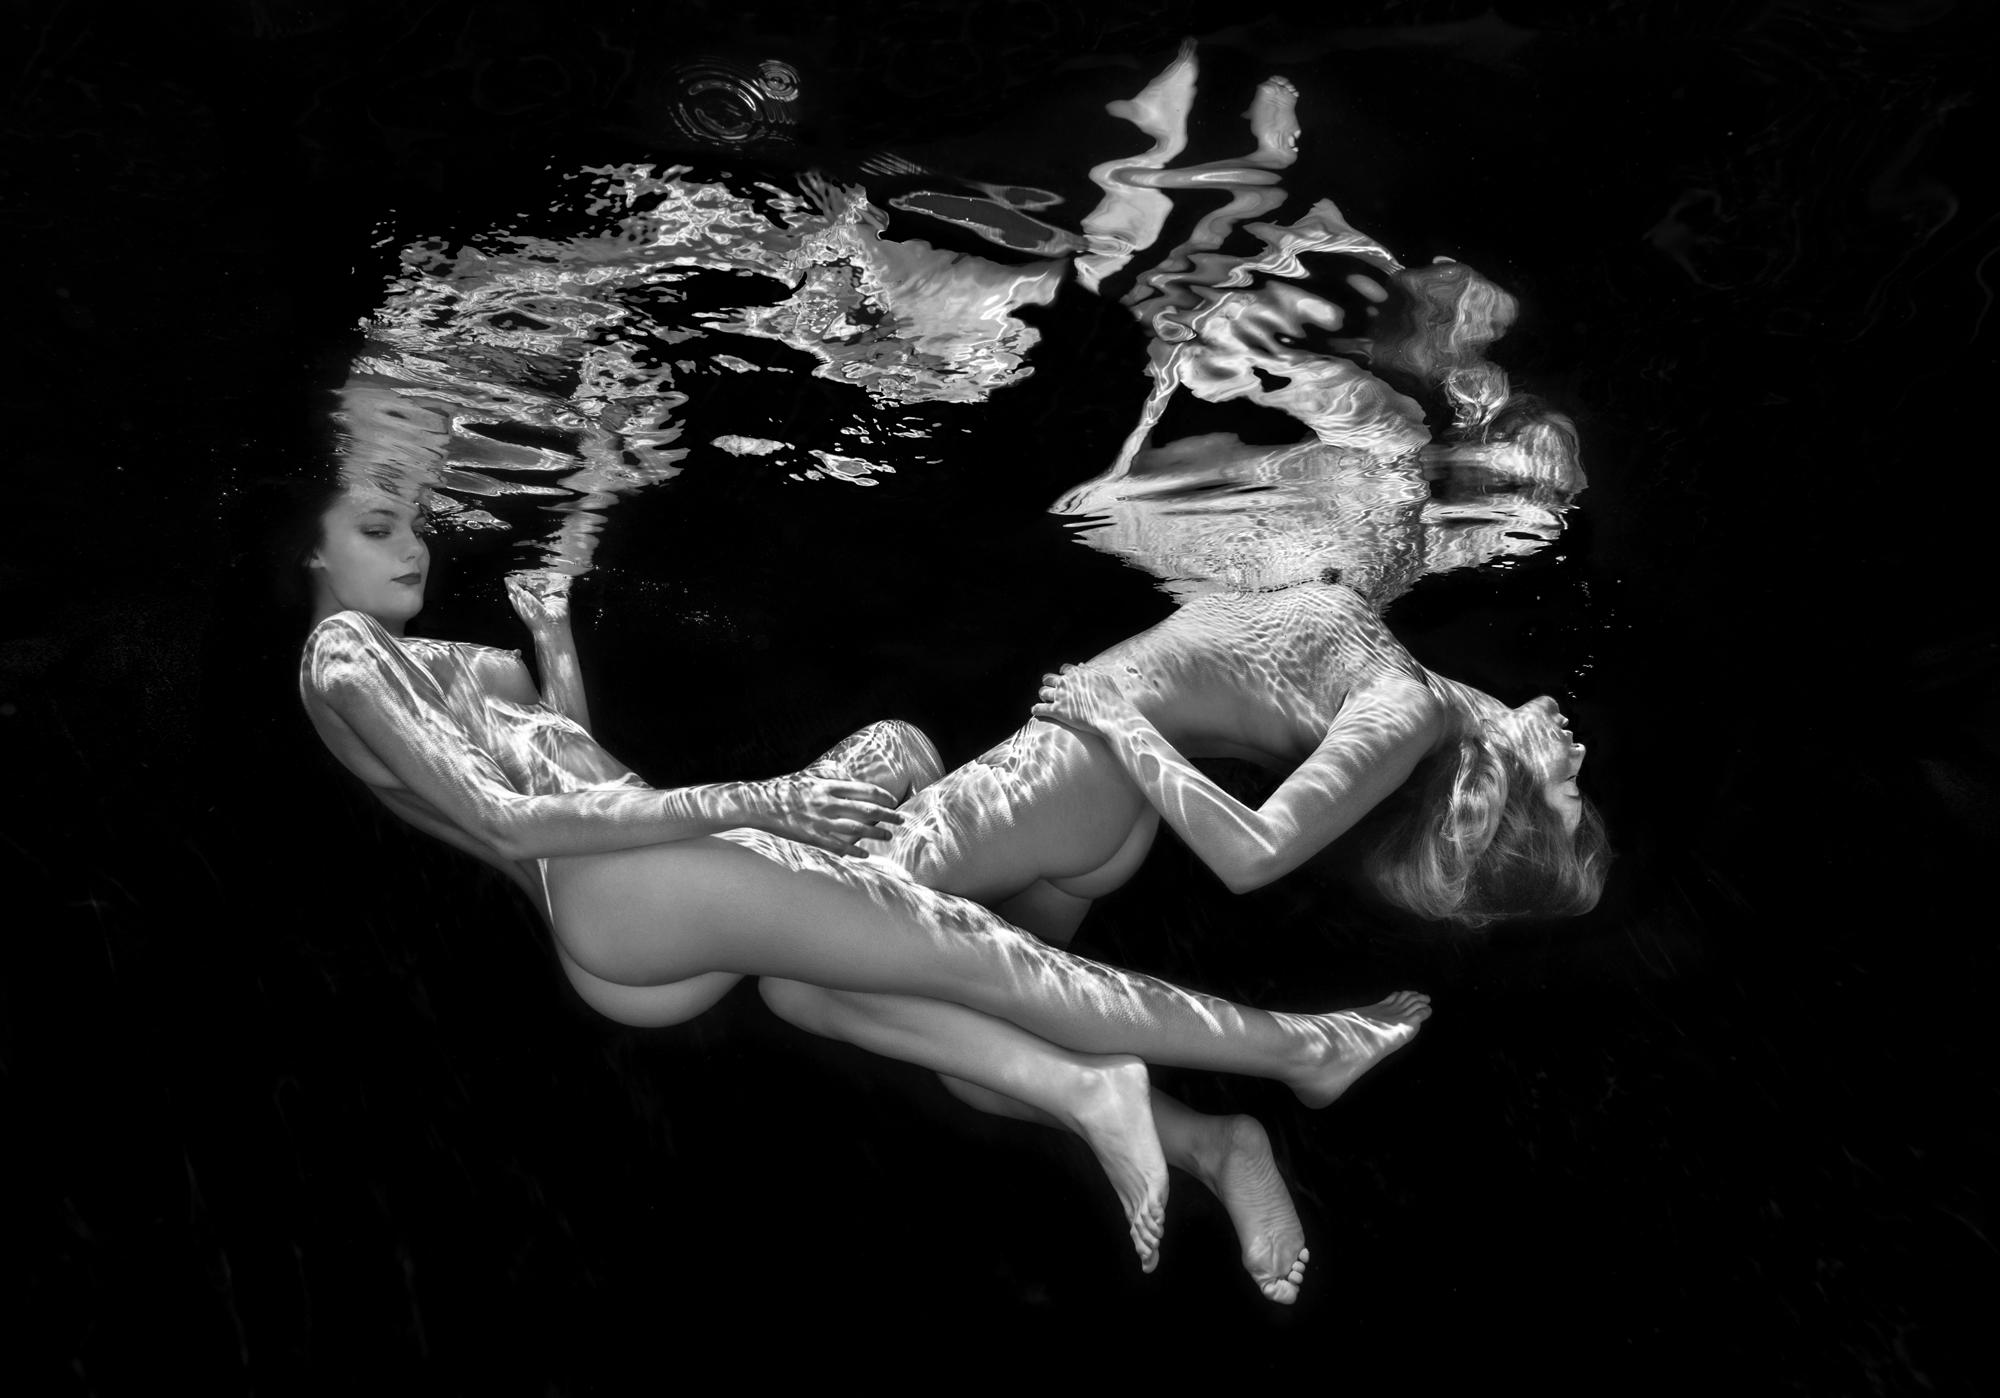 Alex Sher Black and White Photograph - Double Trouble - underwater black & white nude photograph - paper print 24 x 35"